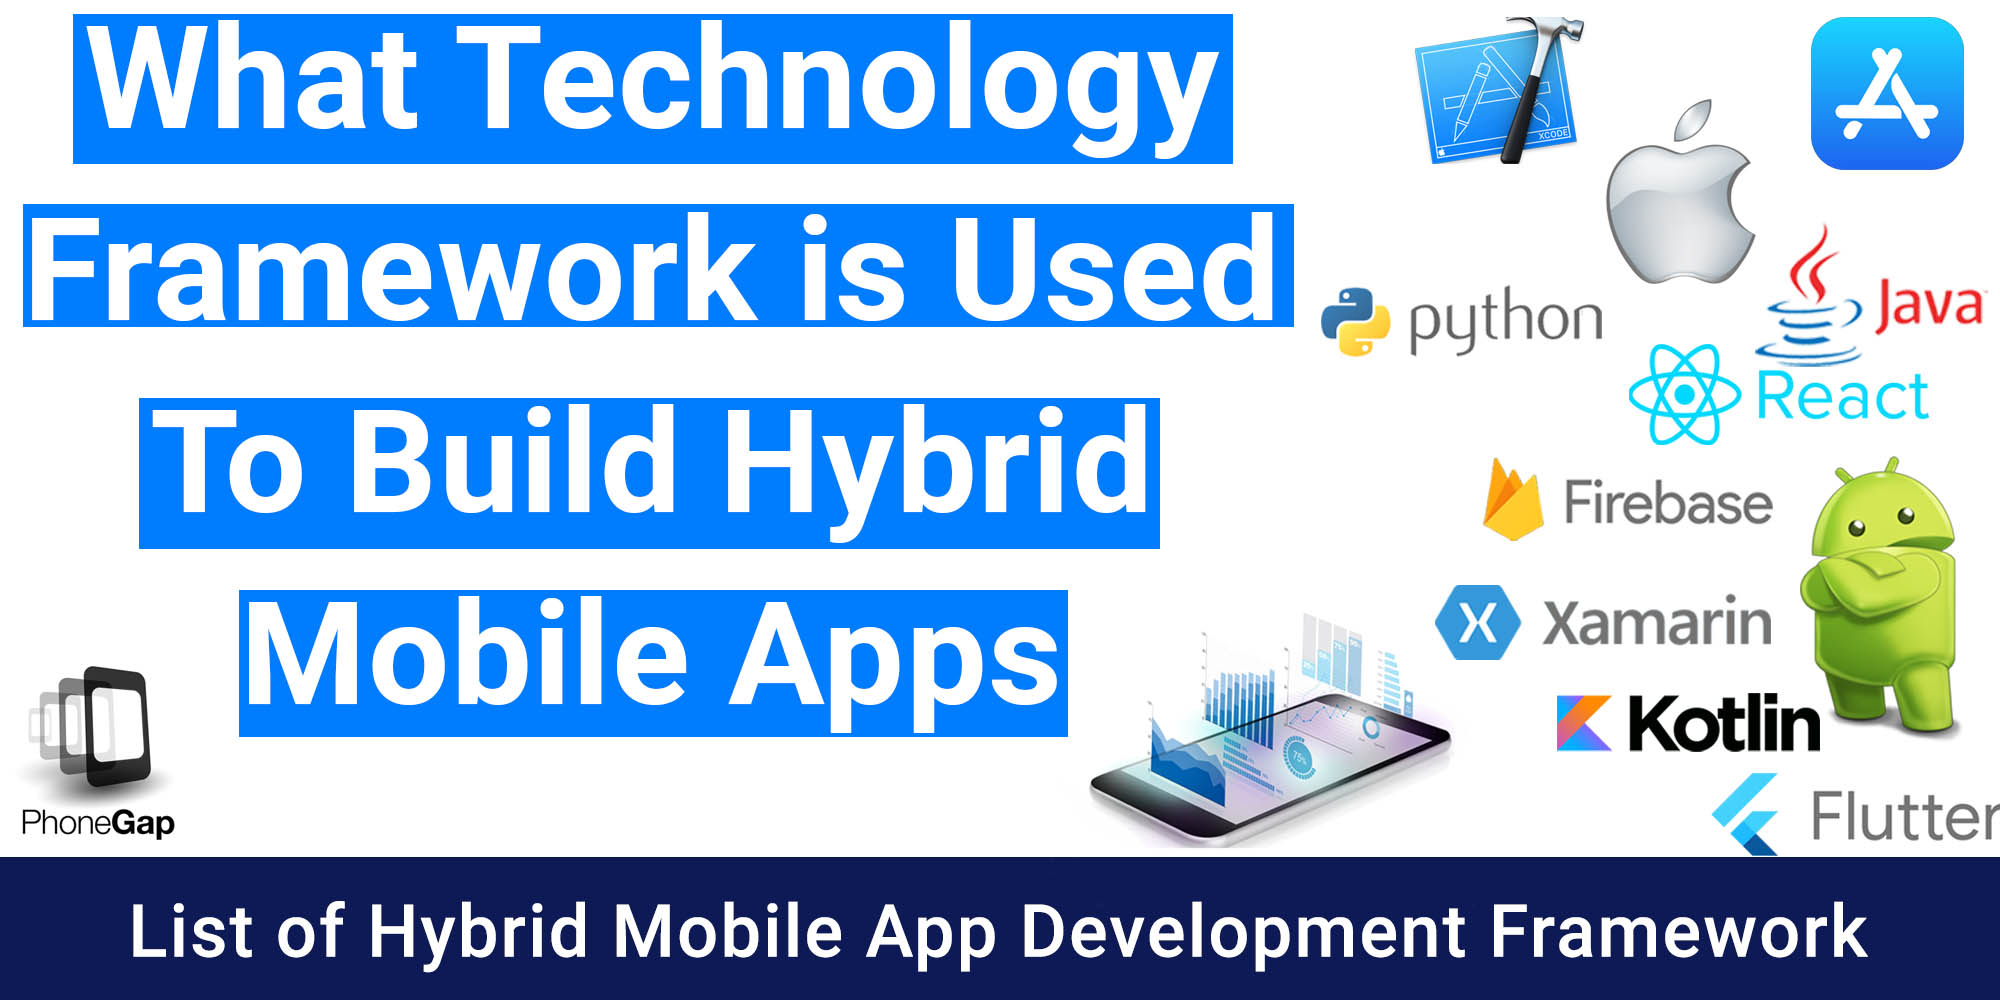 What technology framework is used to build hybrid mobile apps